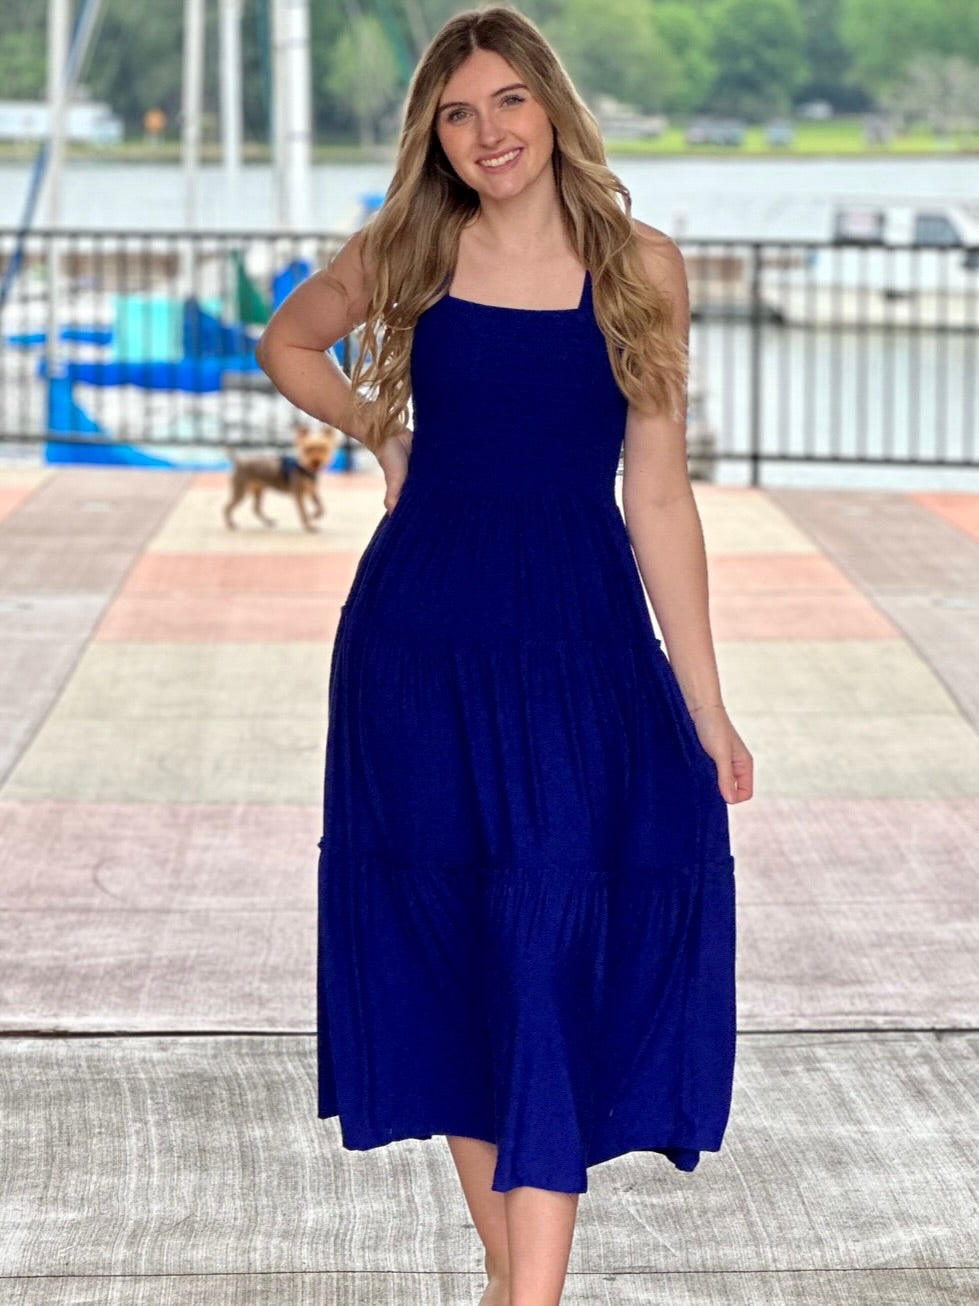 Lexi in bright blue midi dress front view hand on hip